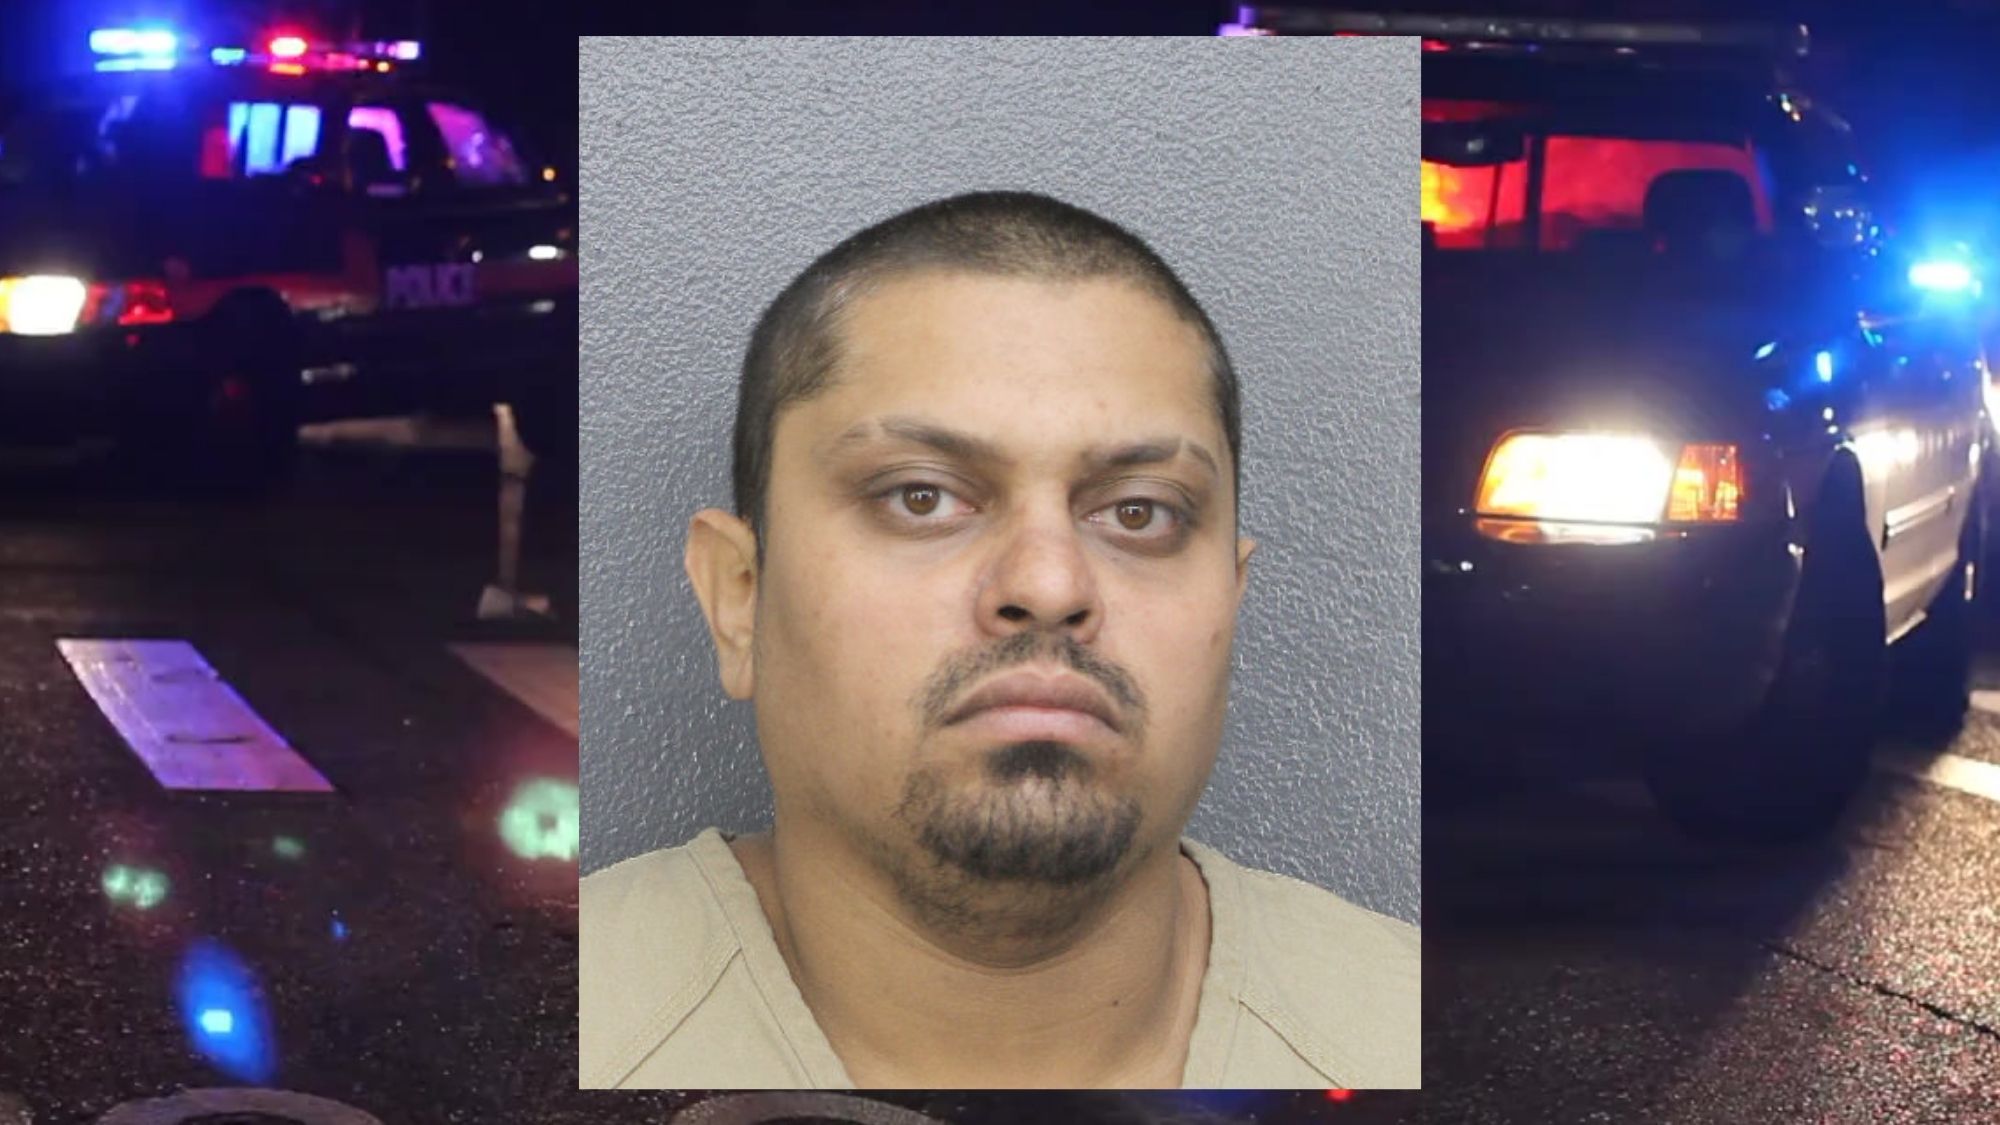 Man Arrested in Coral Springs After Pointing AR-15 Into Traffic